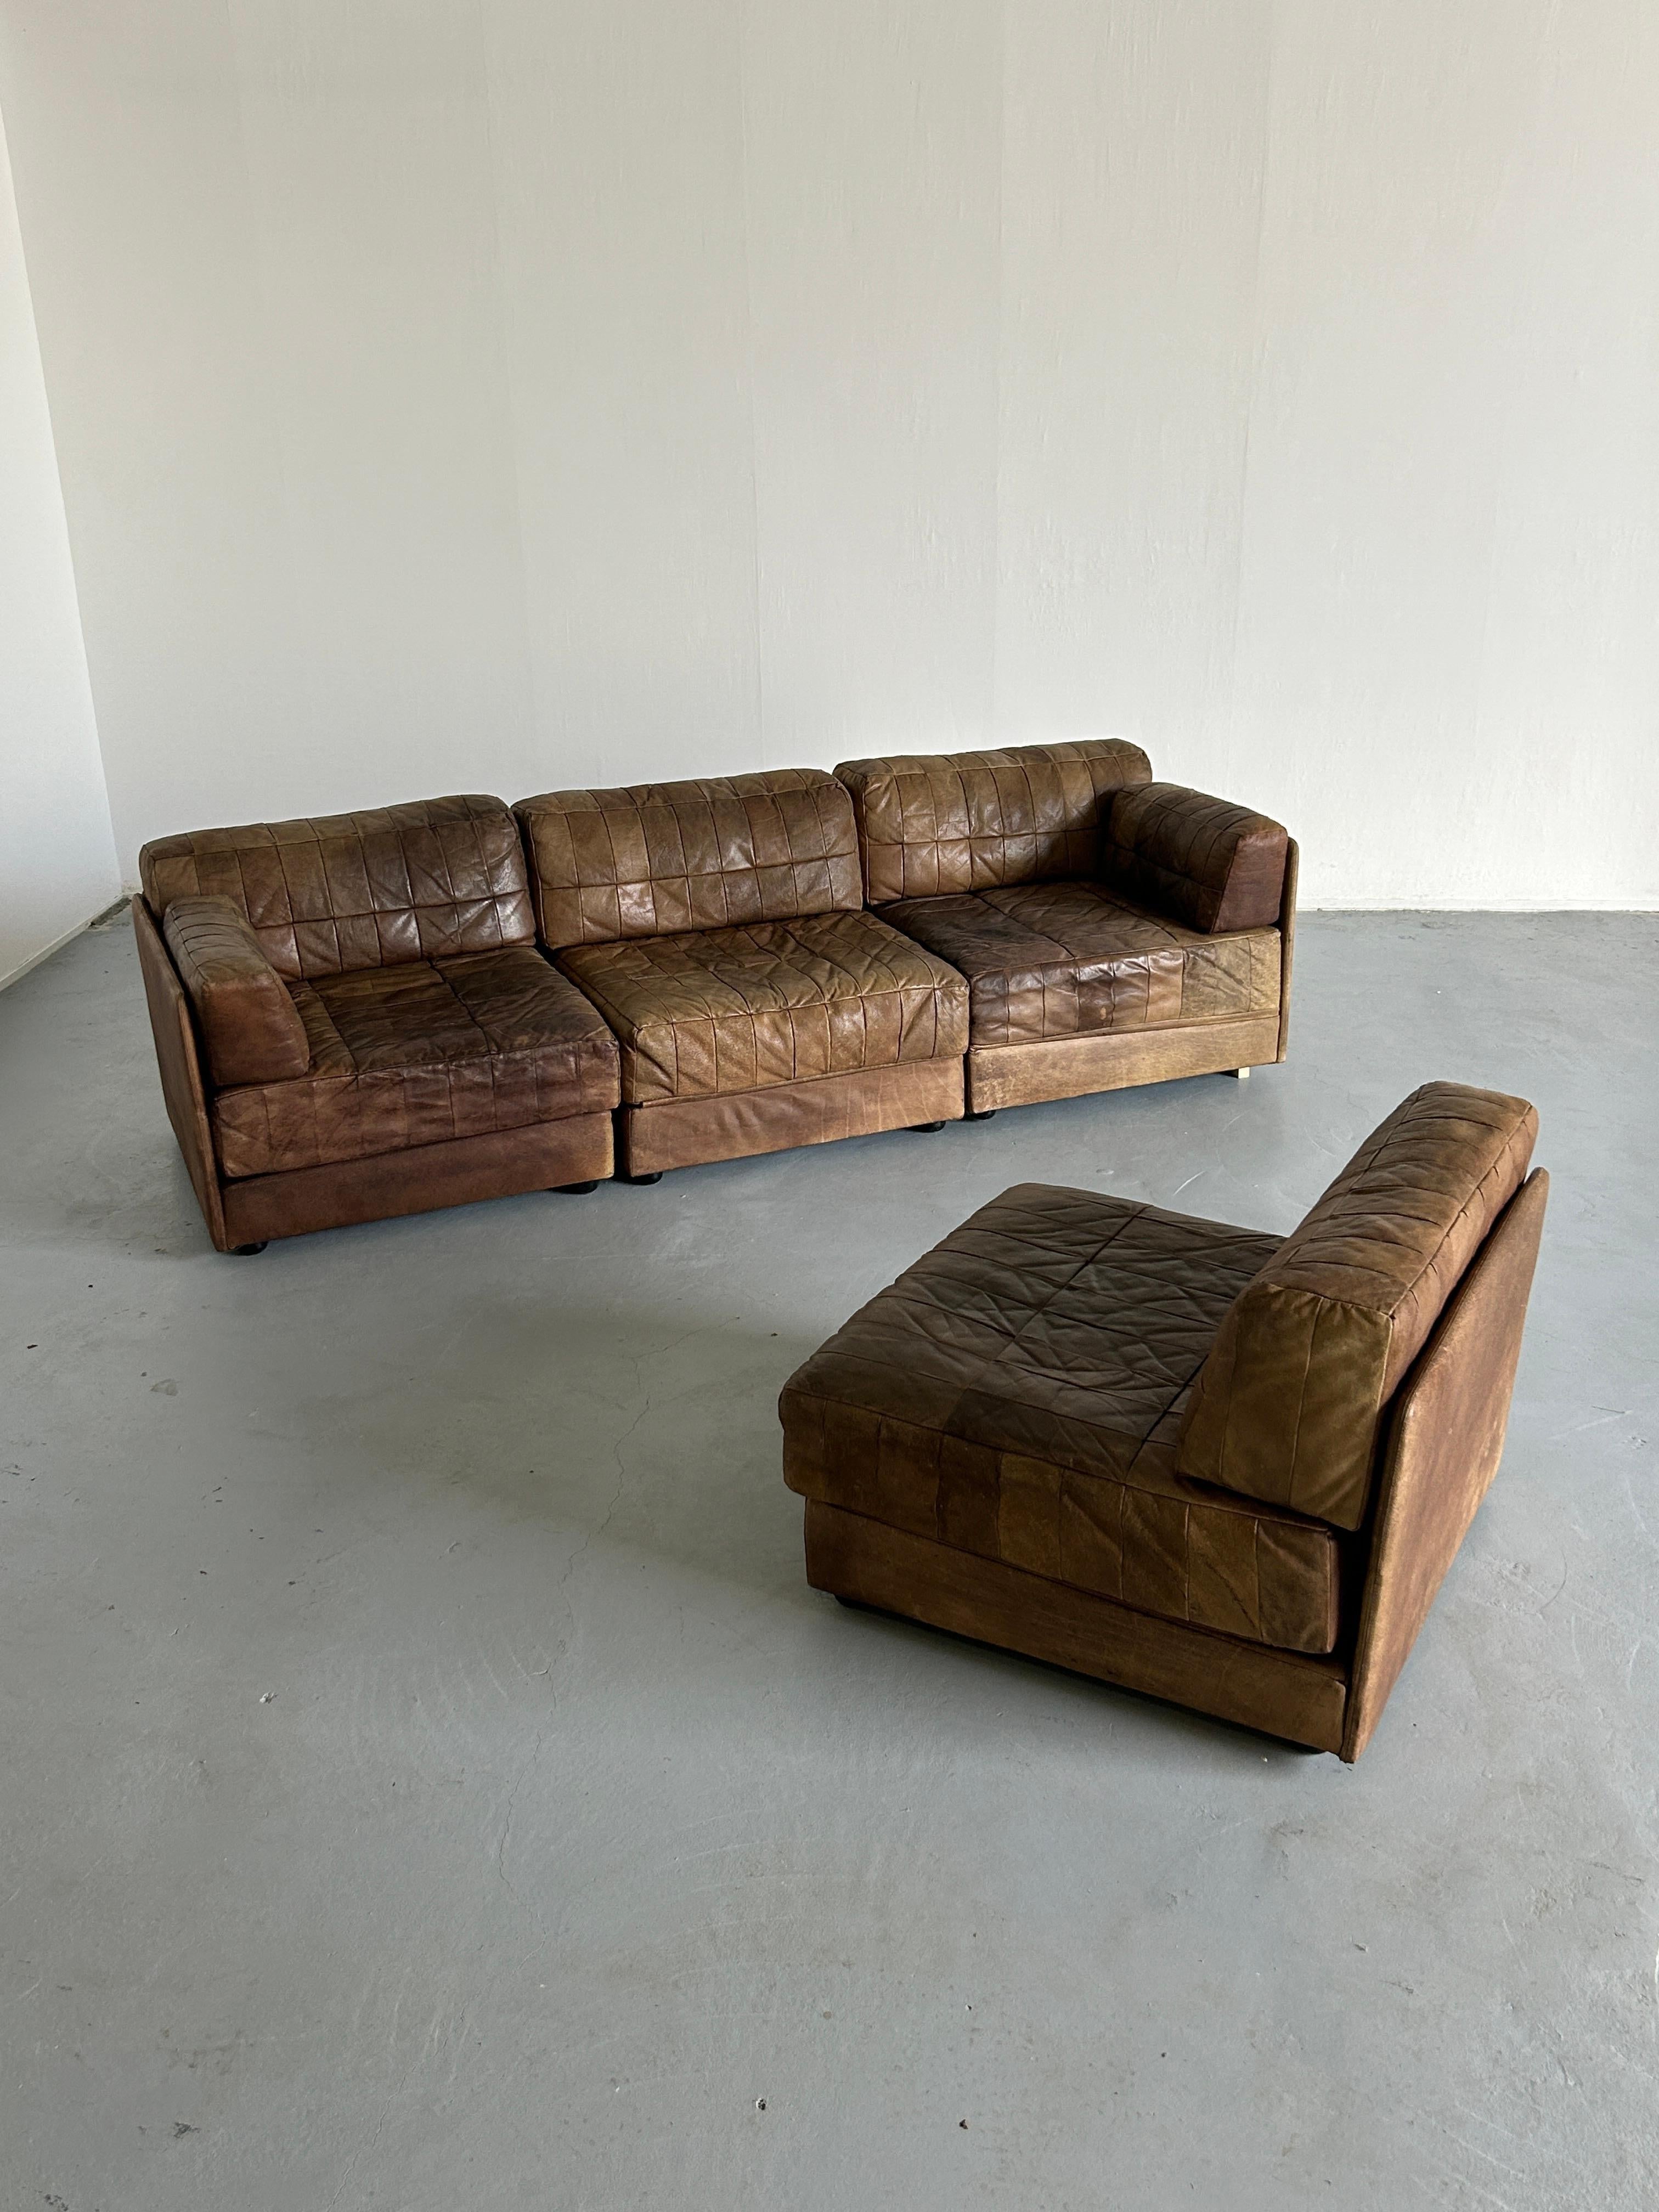 German Mid-Century-Modern Leather Modular Sofa in the style of De Sede Patchwork, 1970s